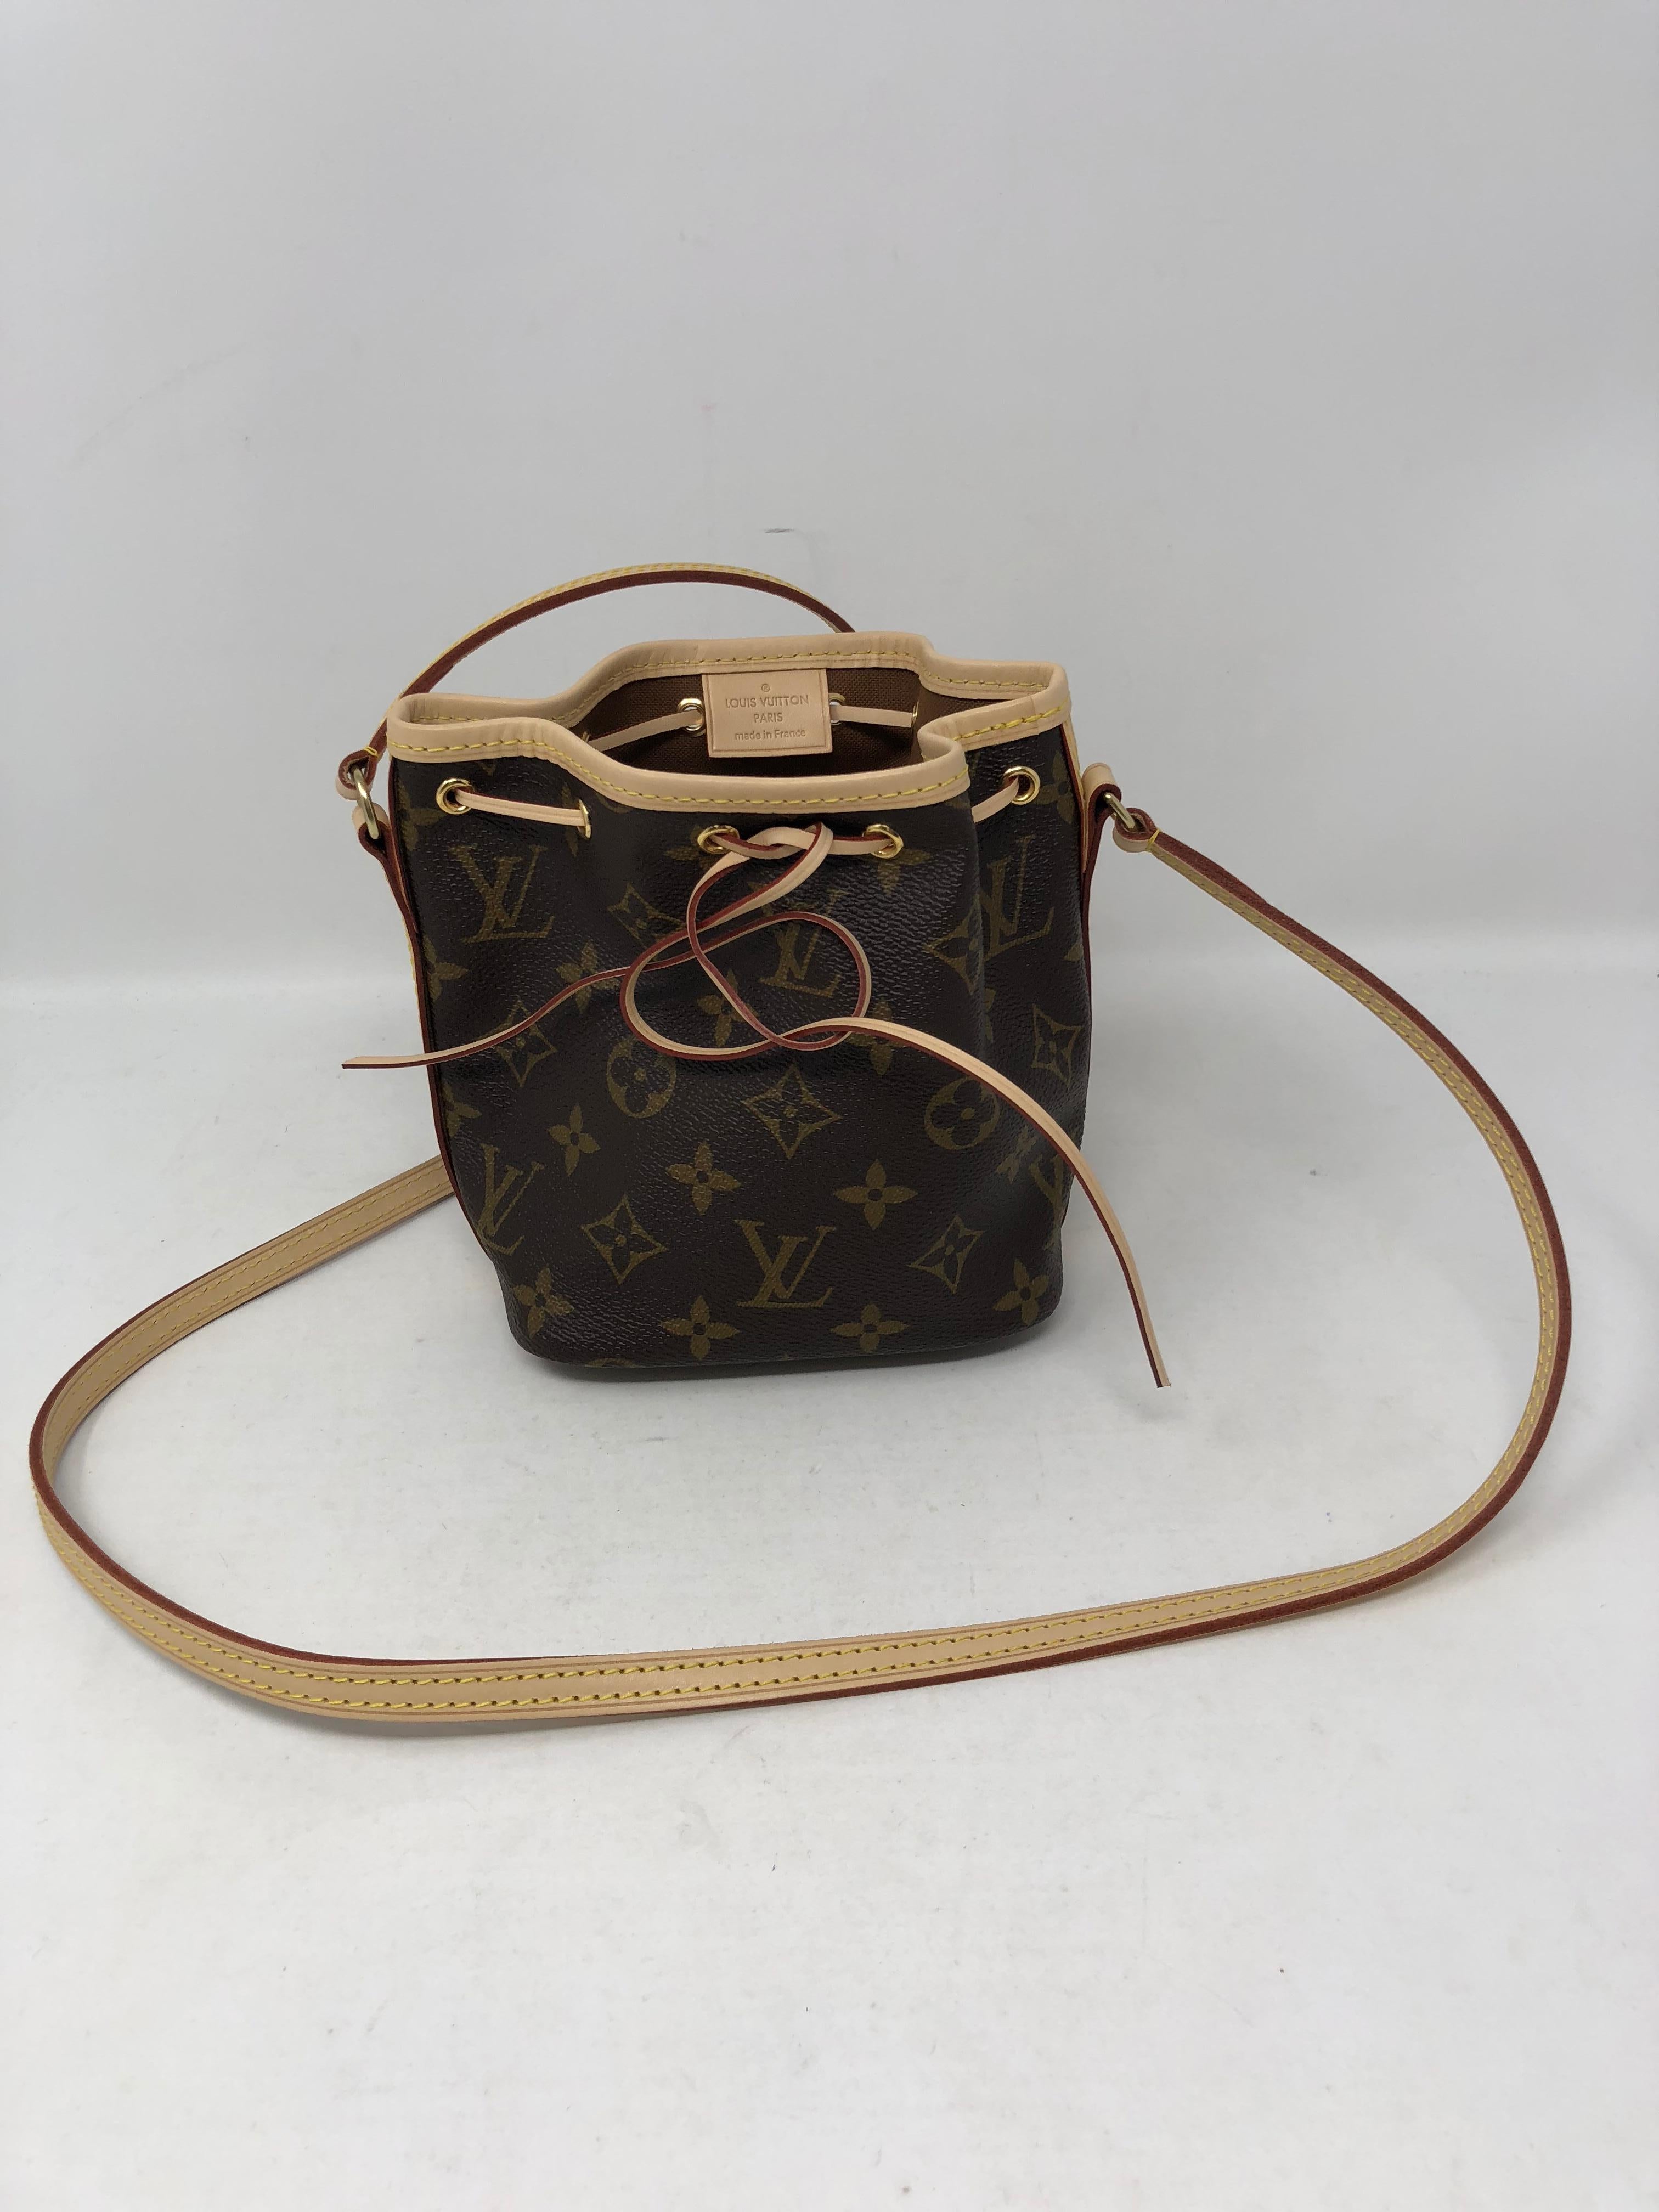 Louis Vuitton Monogram Mini Noe Bucket Crossbody bag. The smallest size made of this style in a crossbody. The Mini style is back. This is a limited item and sold out at LV. Brand new and never used. 